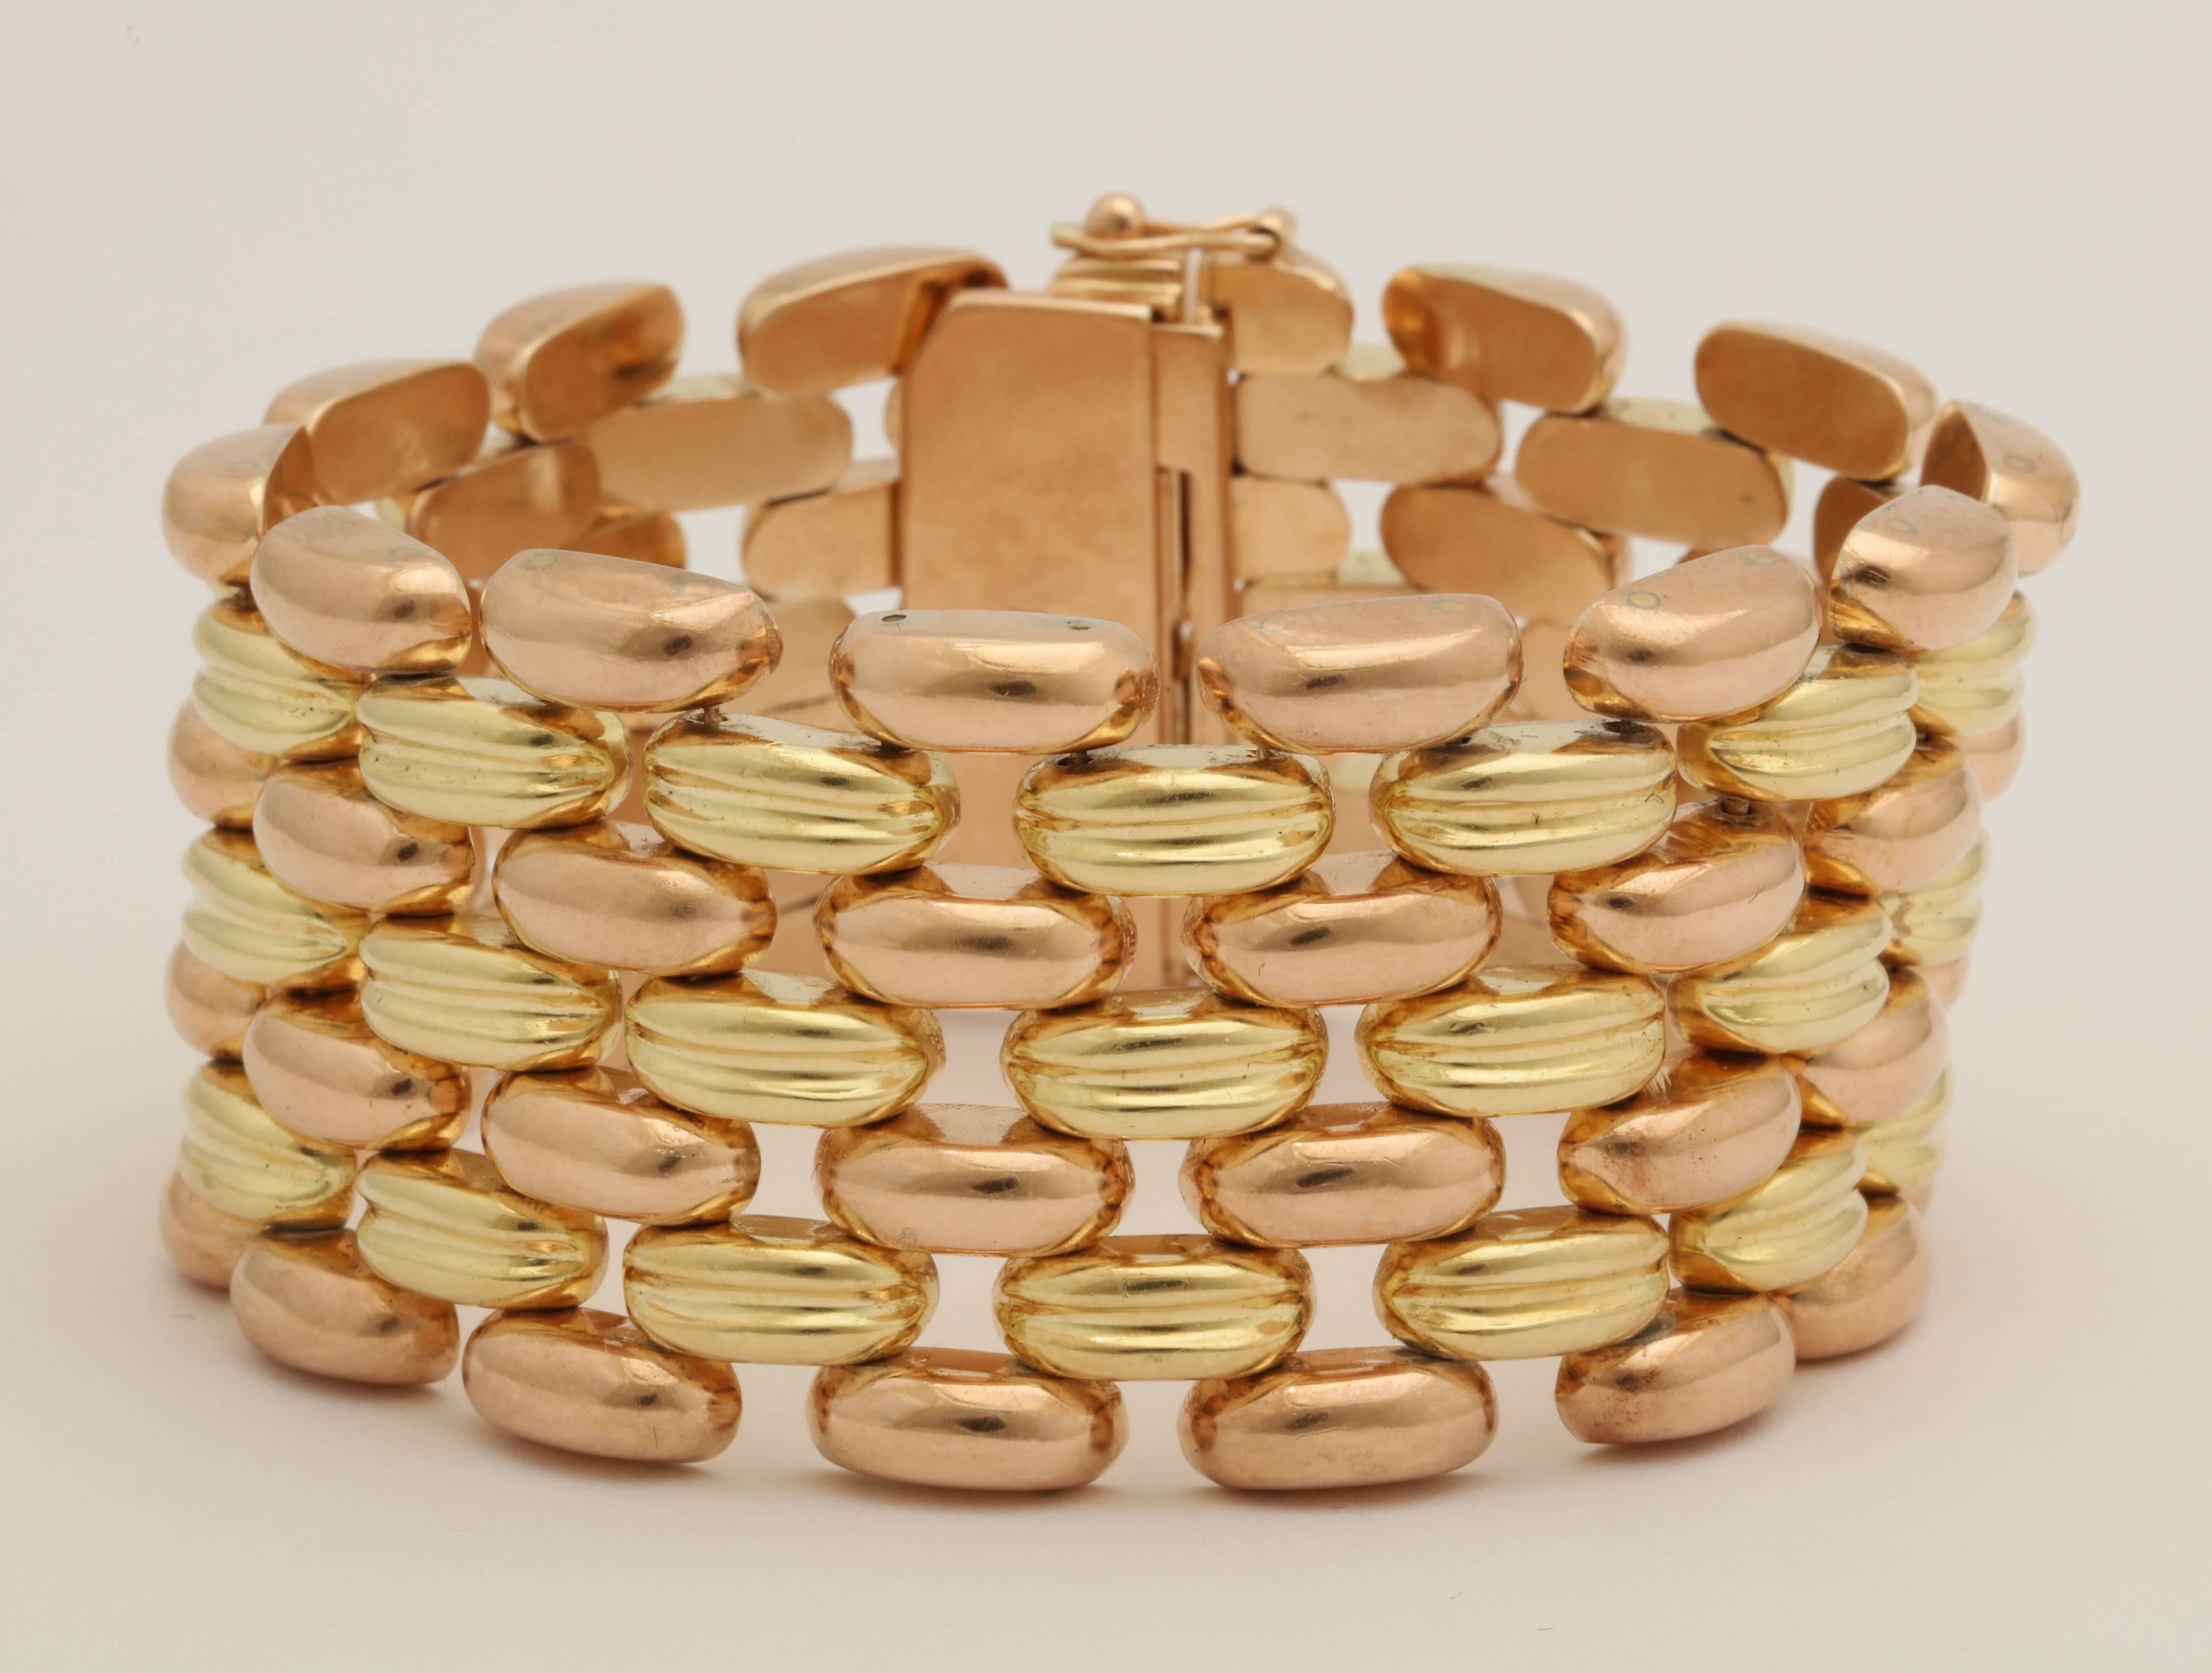 One 18kt Yellow Gold And Pink Gold Chic Two Tone Bracelet Consisting Of Five Rows Of Curved Links. Made In America In The 1950's.